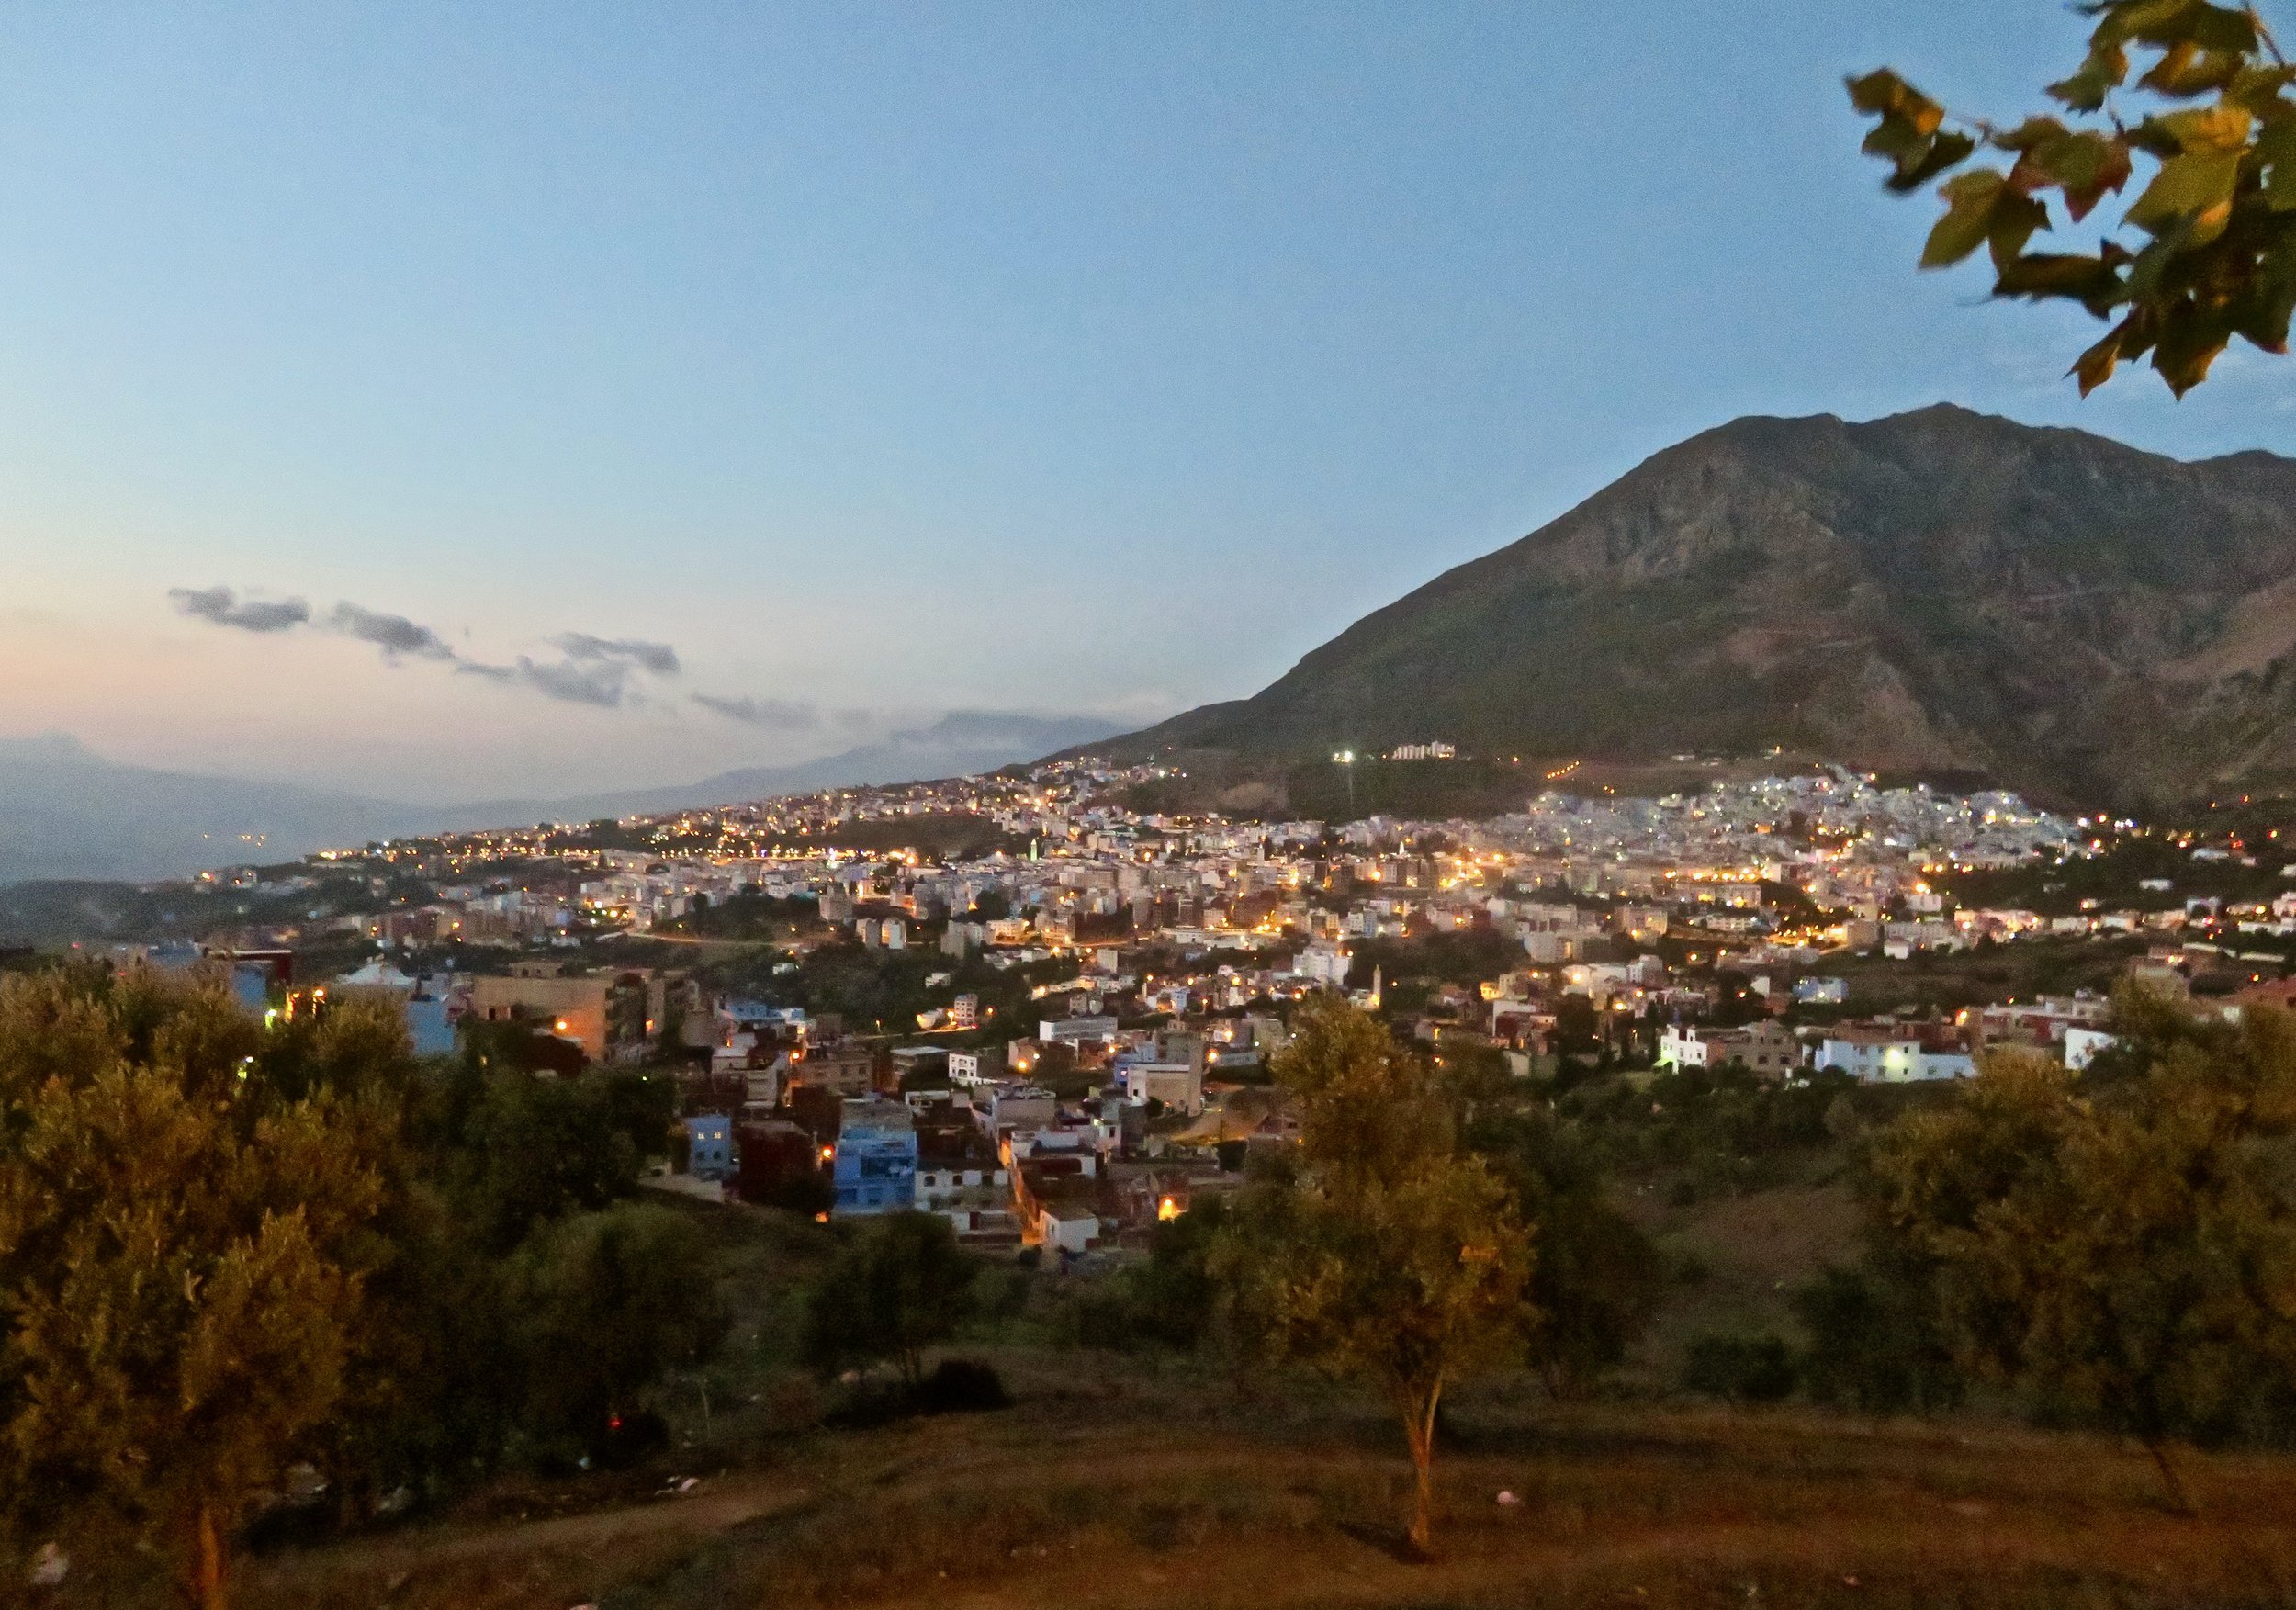 Chefchaouen at sunset, simply stunning!